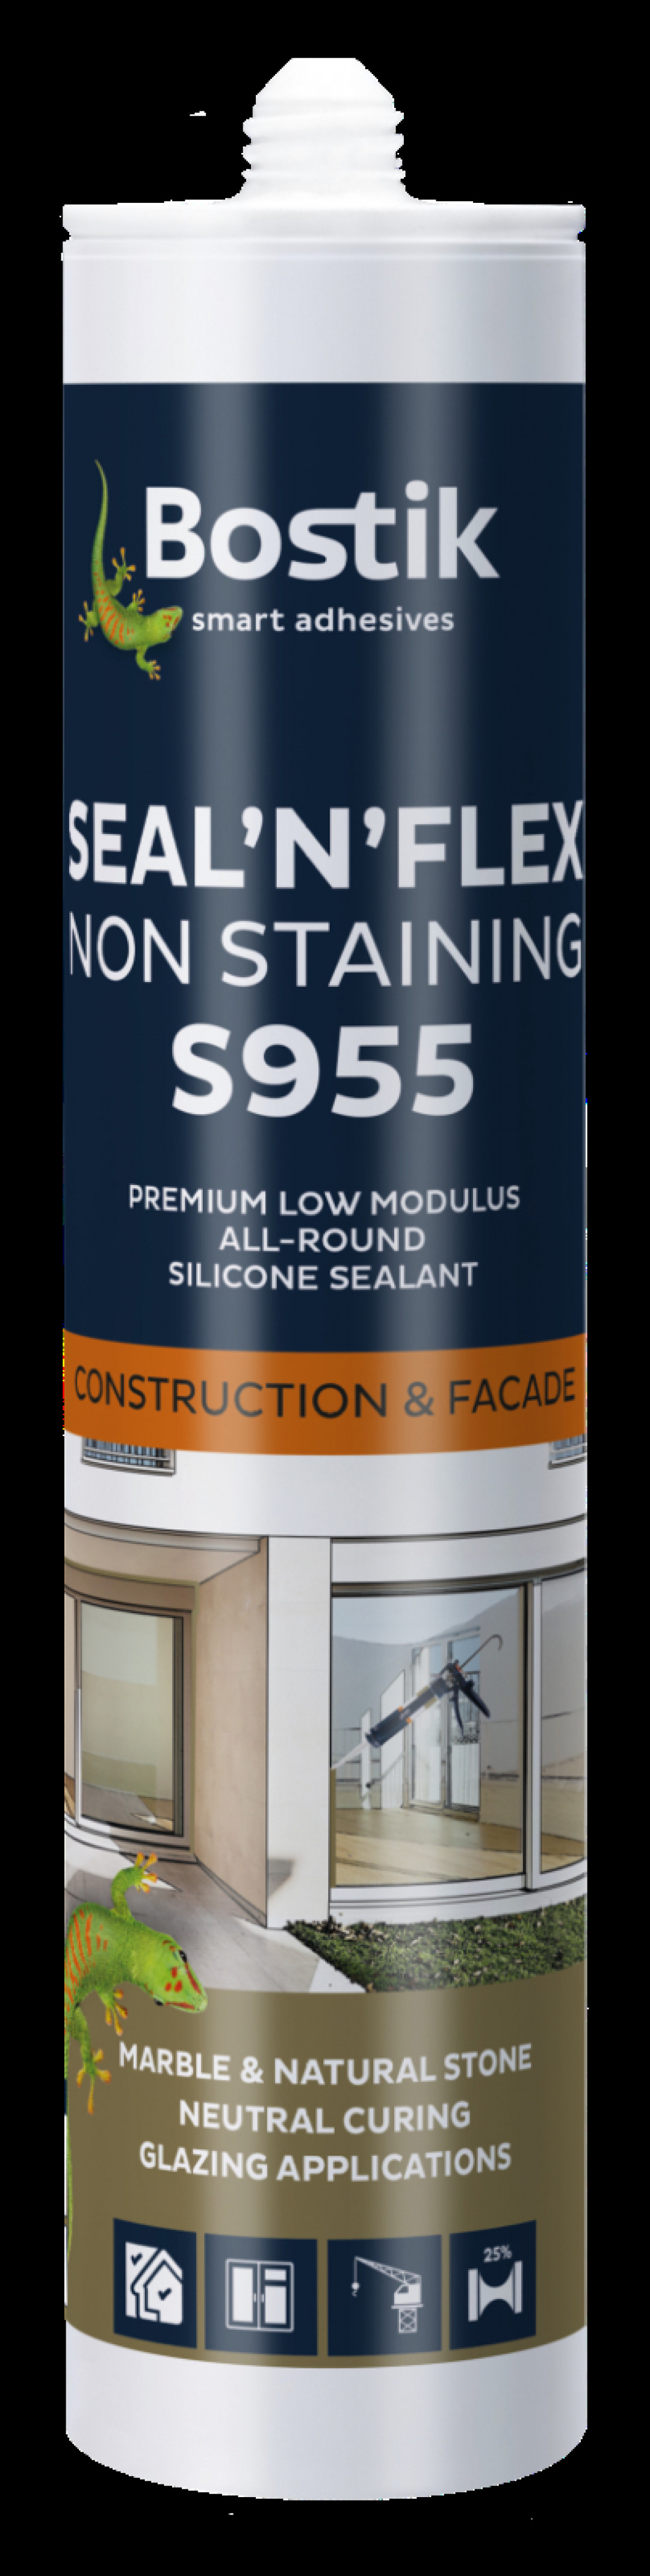 S955 SEAL ’N’ FLEX NON-STAINING from Bostik Asia Pacific